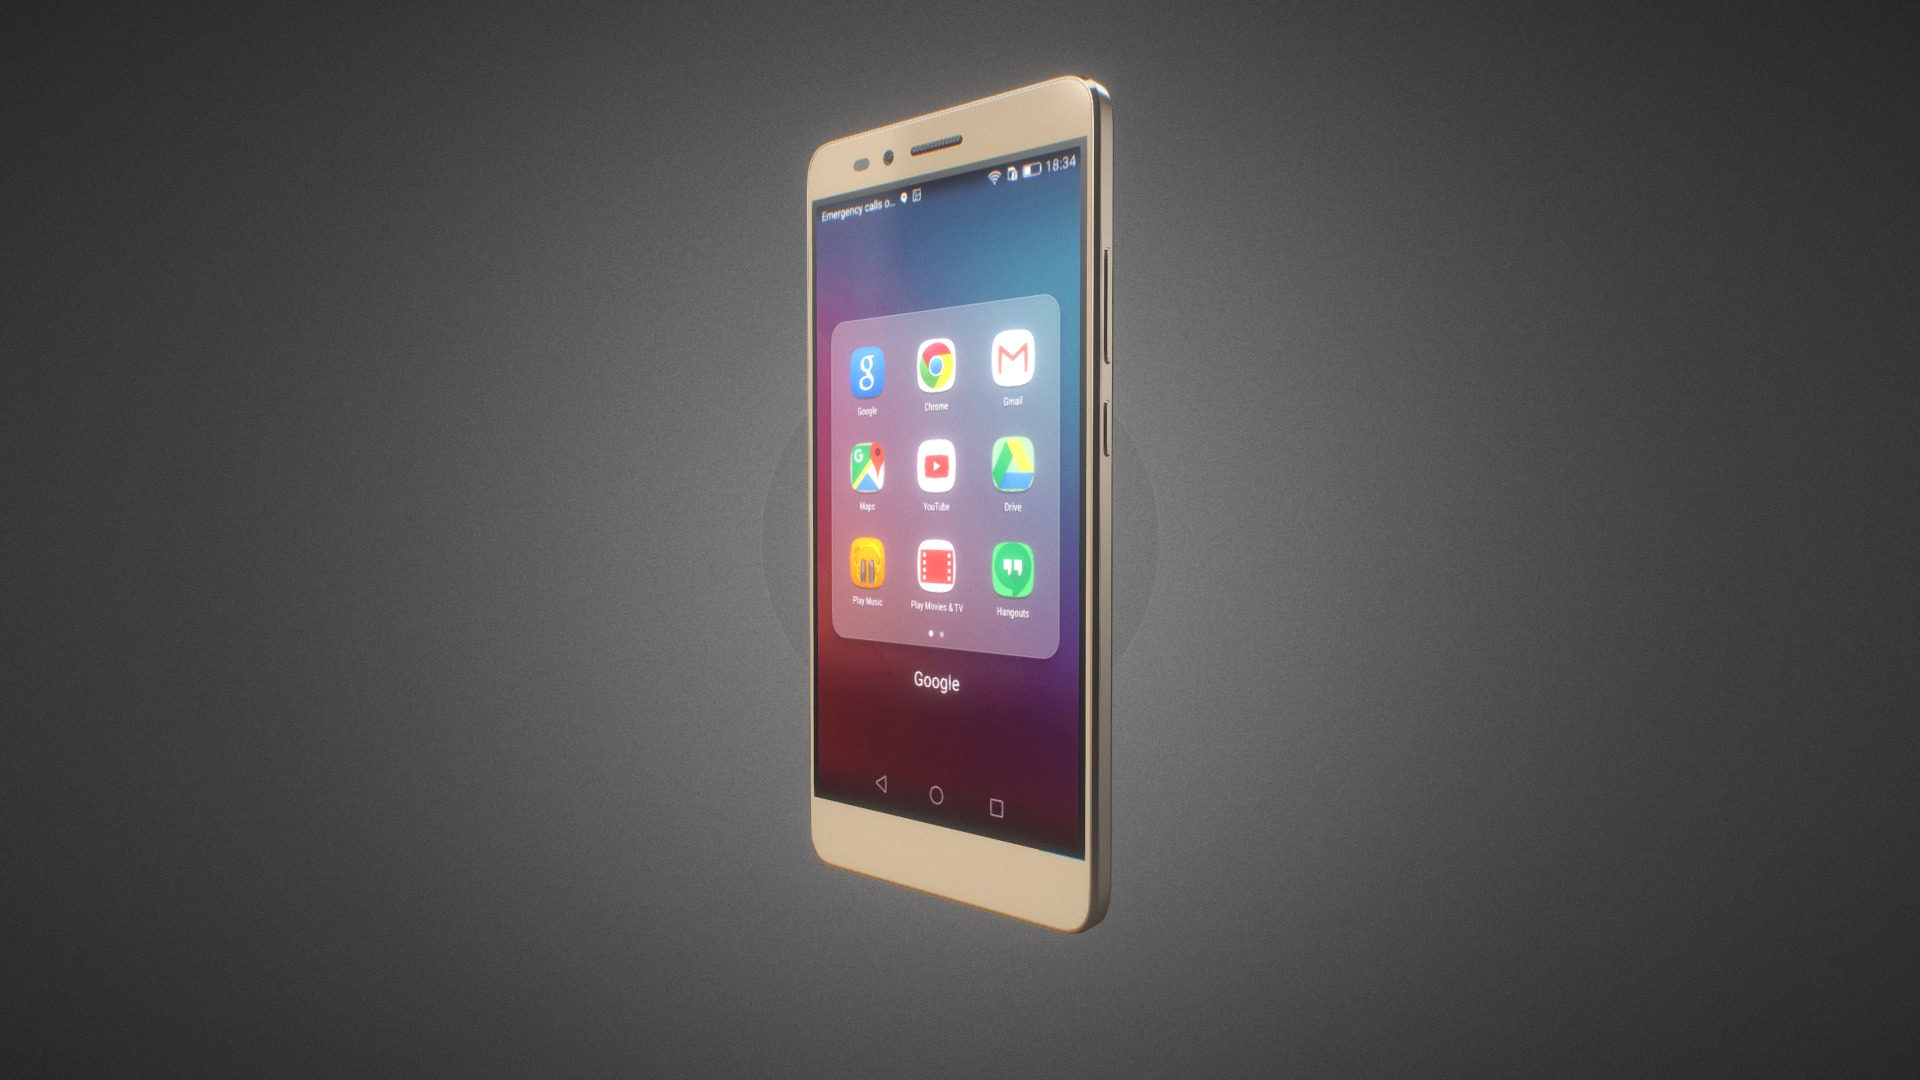 3D model Huawei Honor 5X for Element 3D - This is a 3D model of the Huawei Honor 5X for Element 3D. The 3D model is about a cell phone on a table.